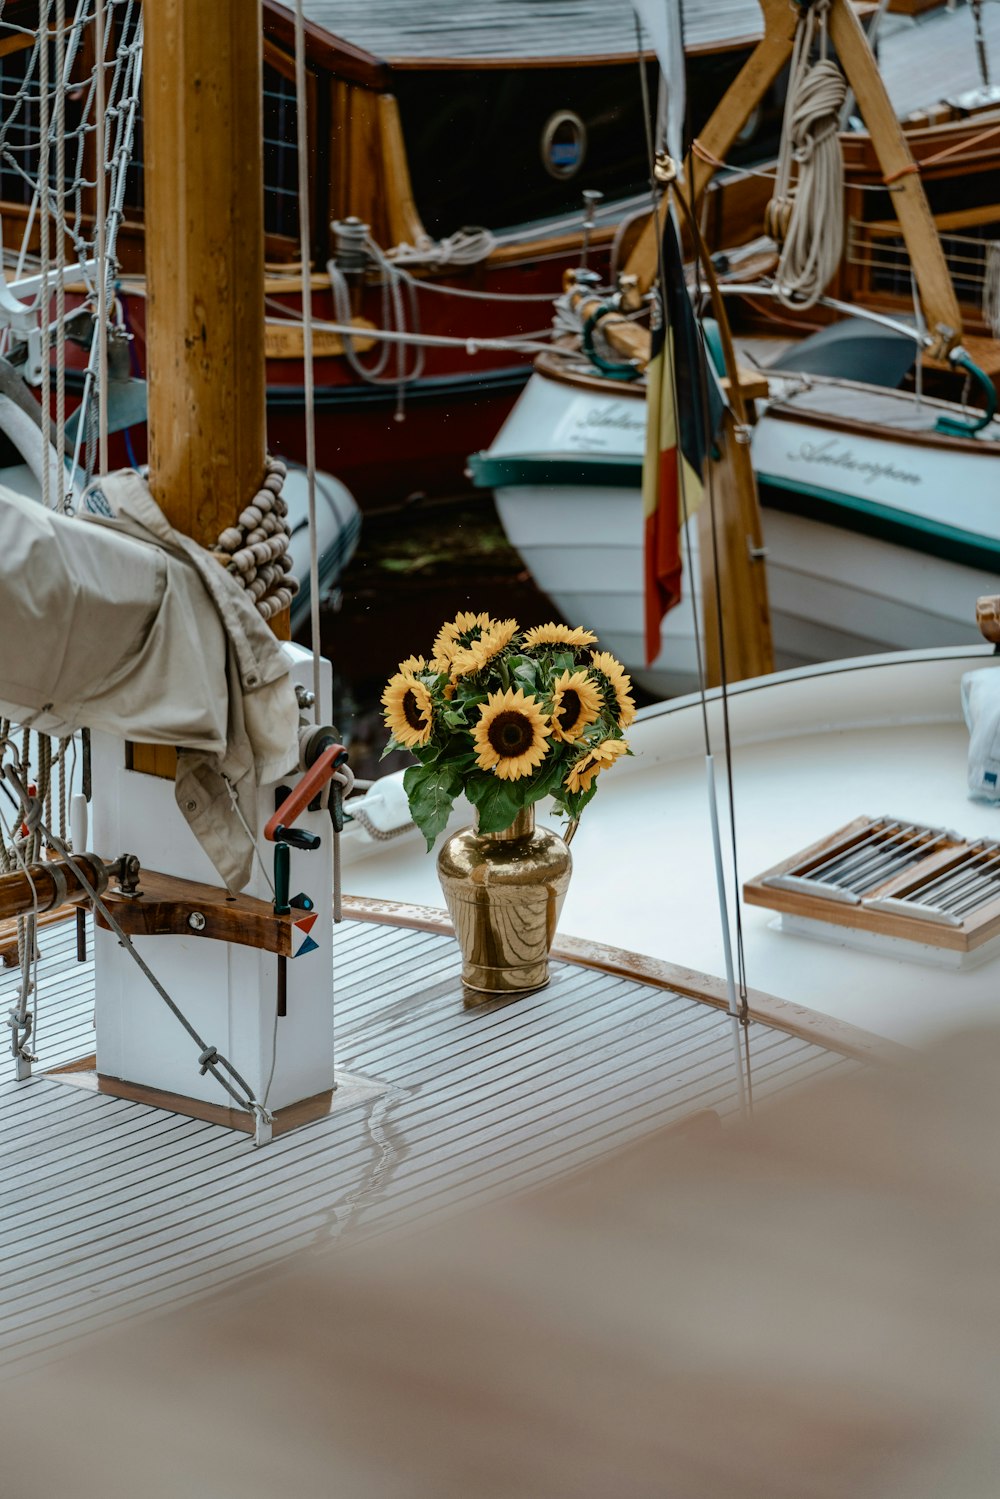 a vase of sunflowers sits on the deck of a sailboat